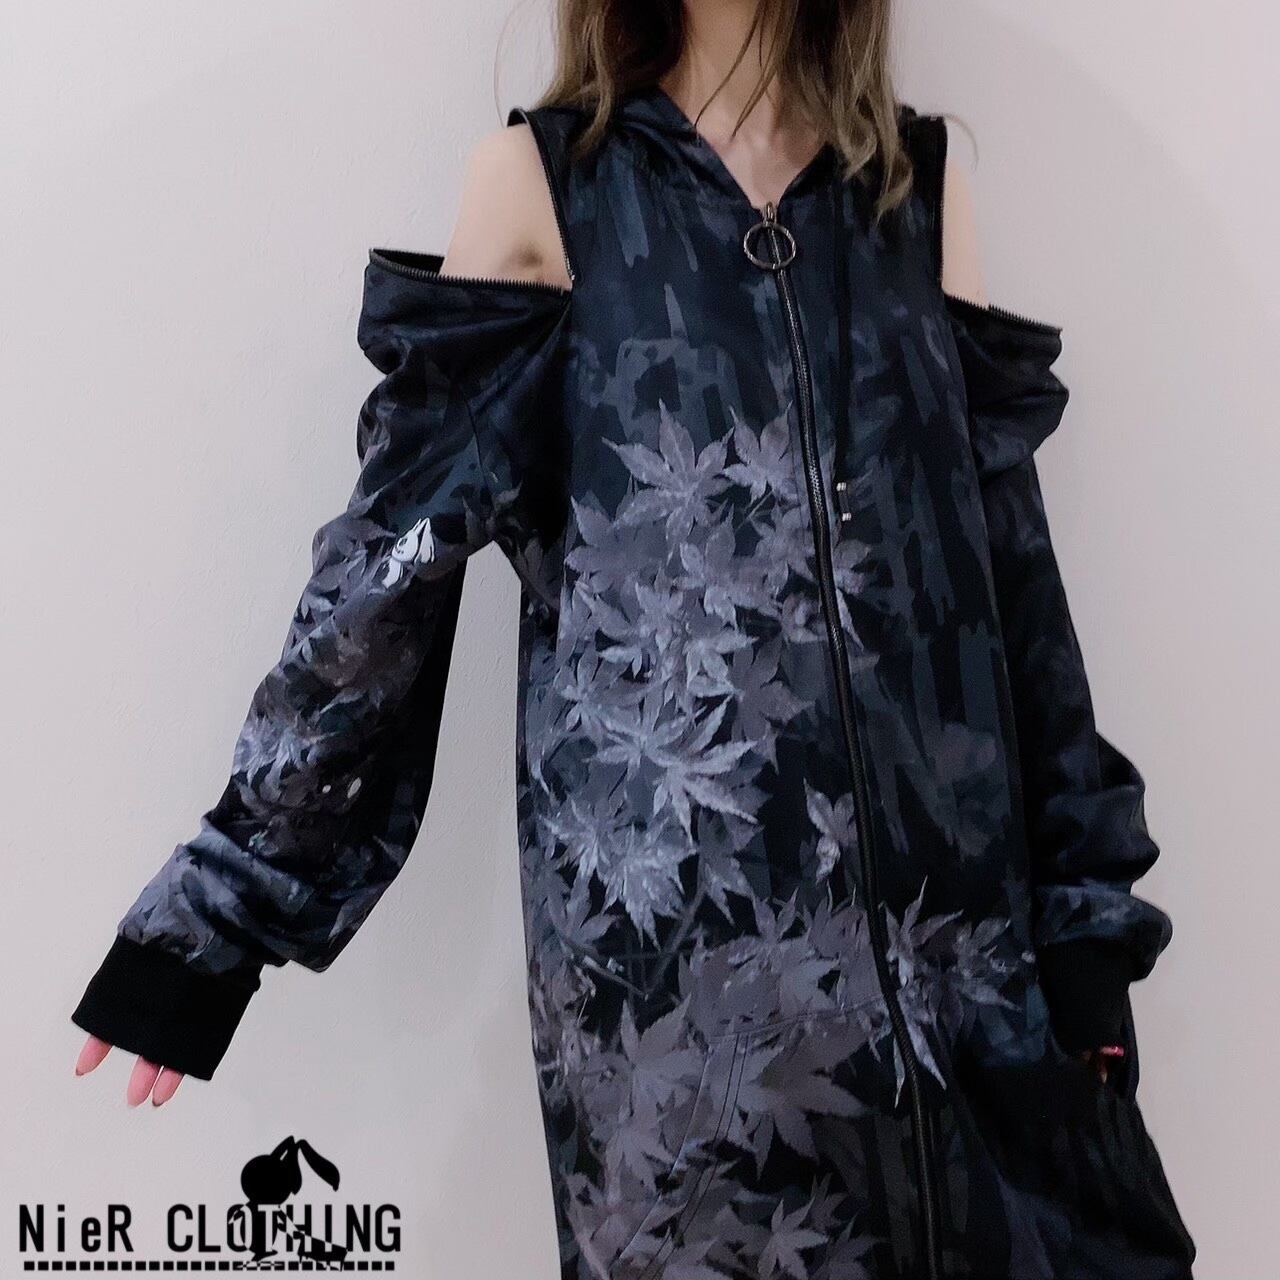 2WAY OFF-Shoulder ZIP PARKA【黒紅葉柄】 | NIER CLOTHING powered by BASE